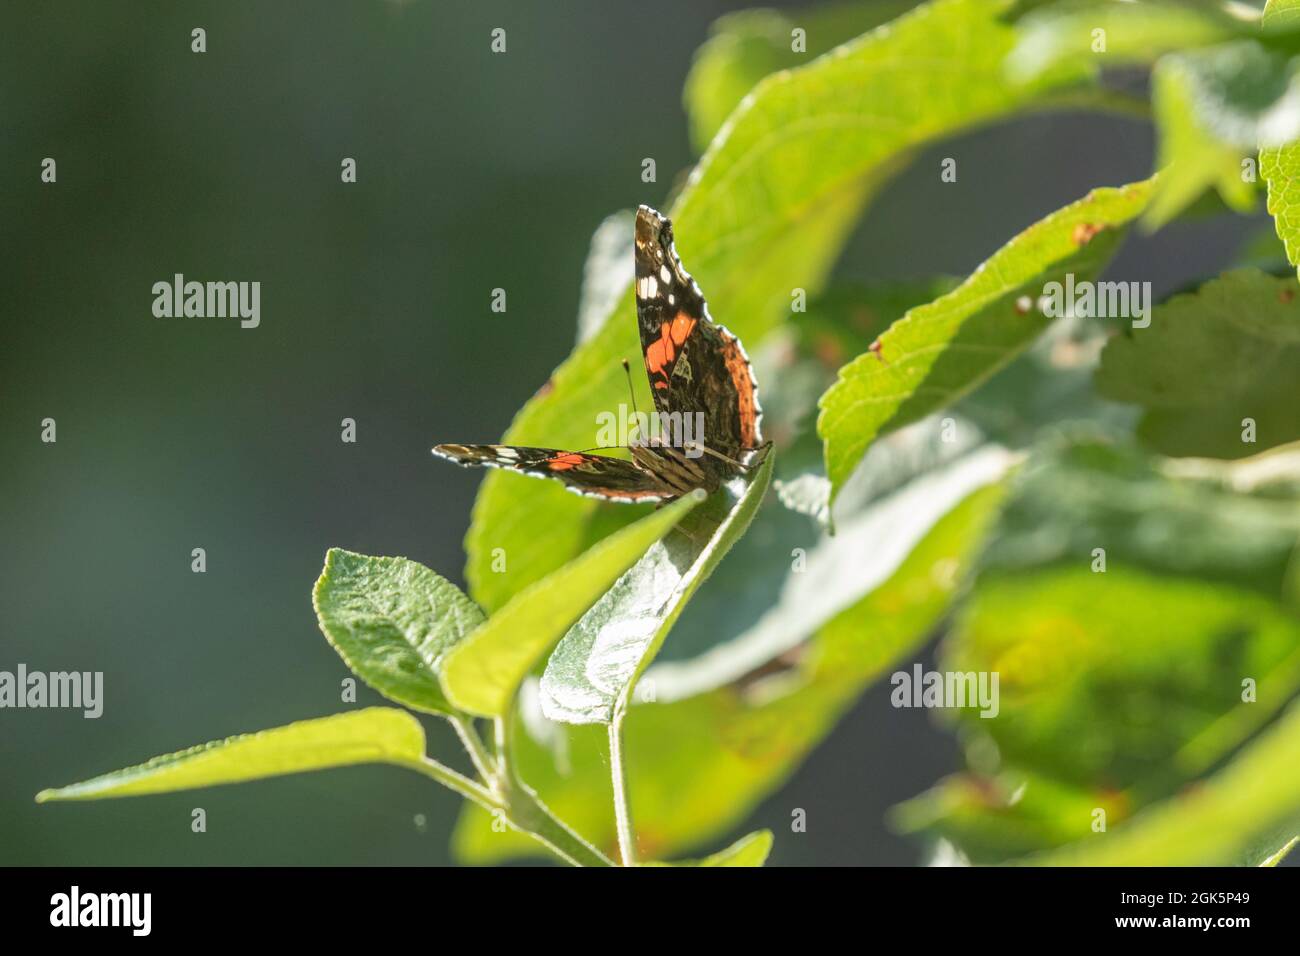 A red admiral butterfly feeding on fresh green leaves. Stock Photo